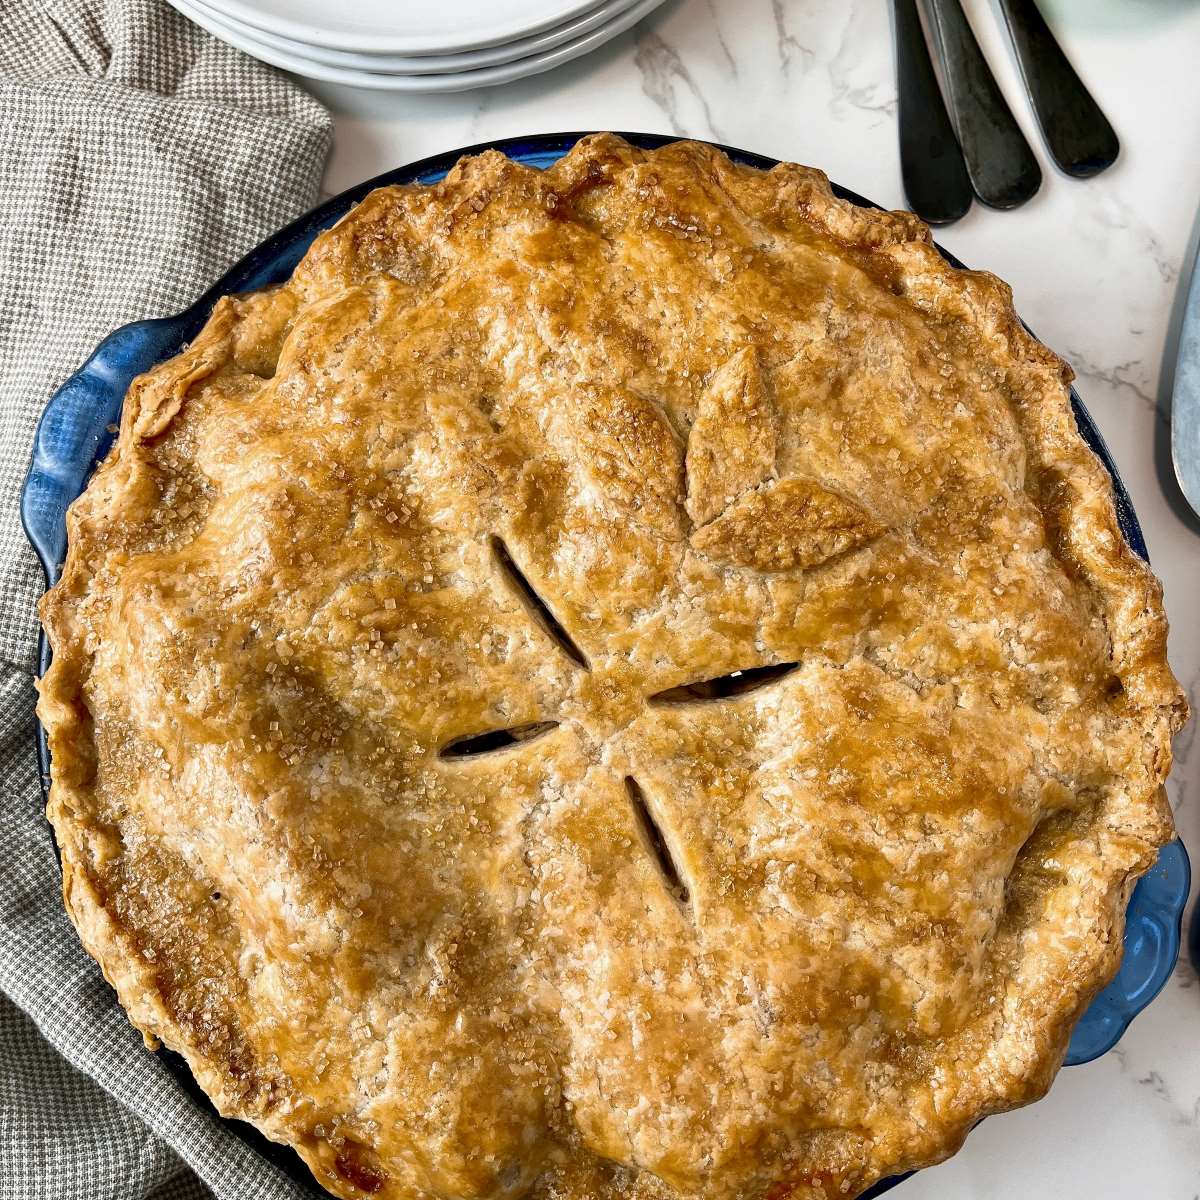 How To Store Homemade Apple Pie